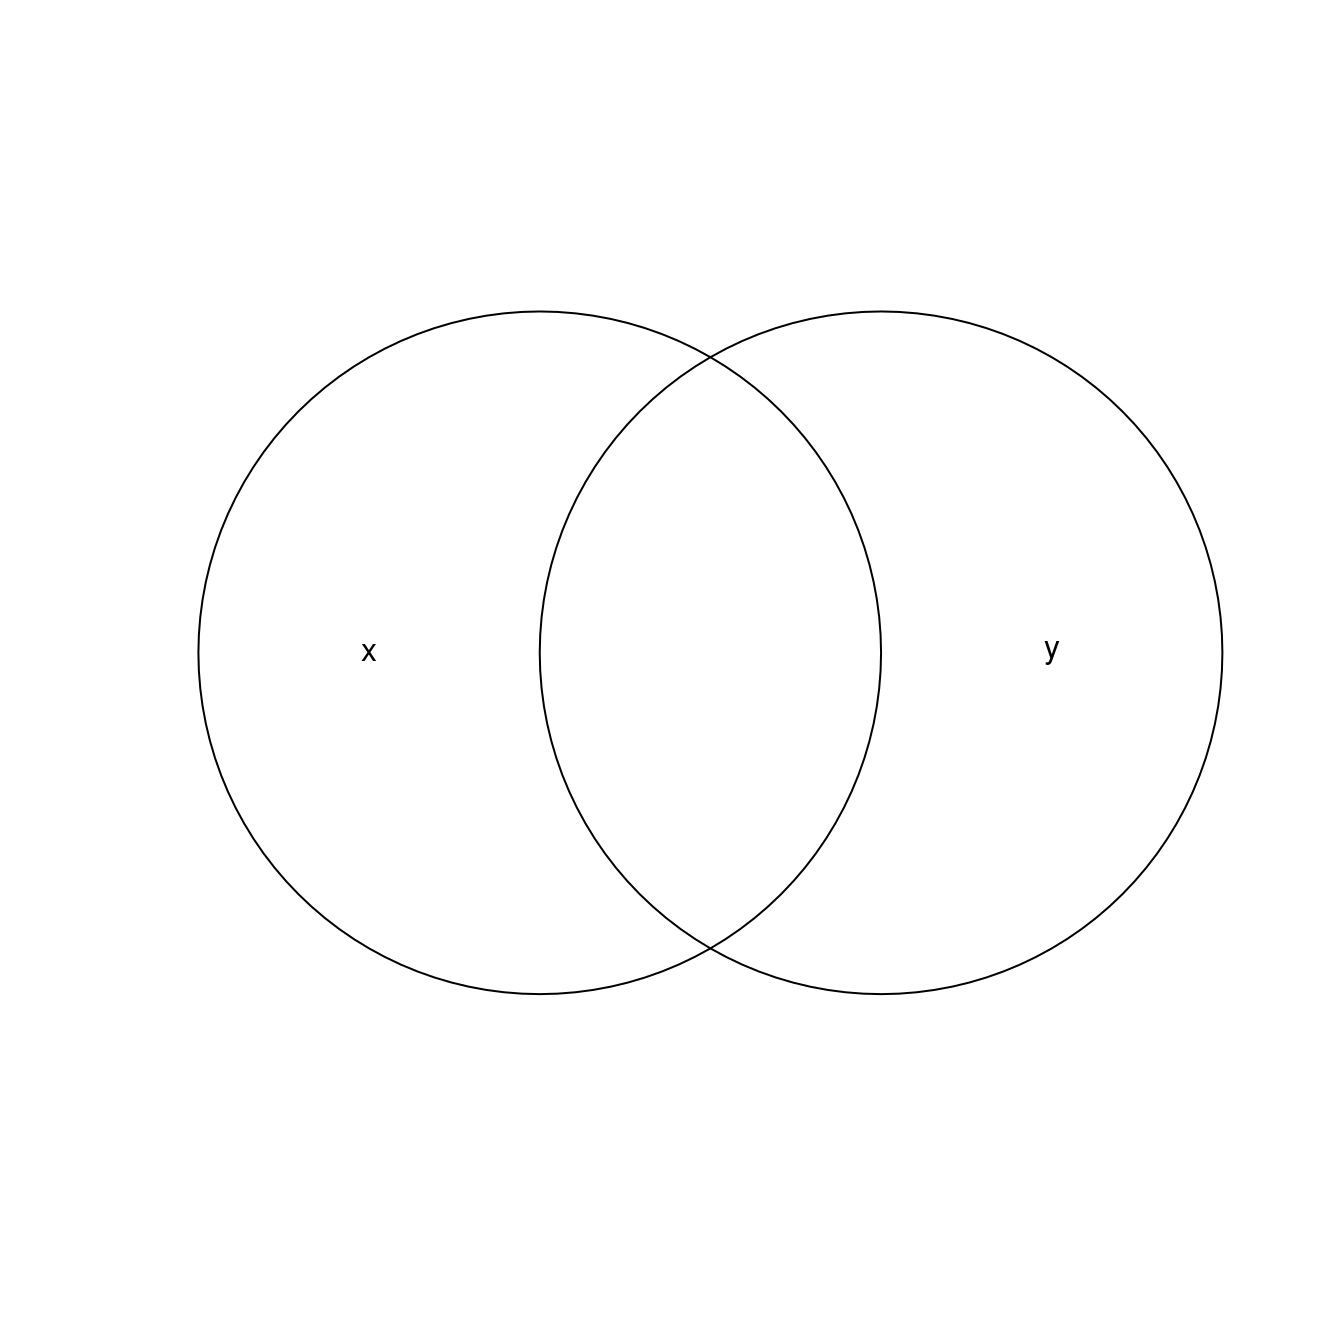 Overlapping circles.